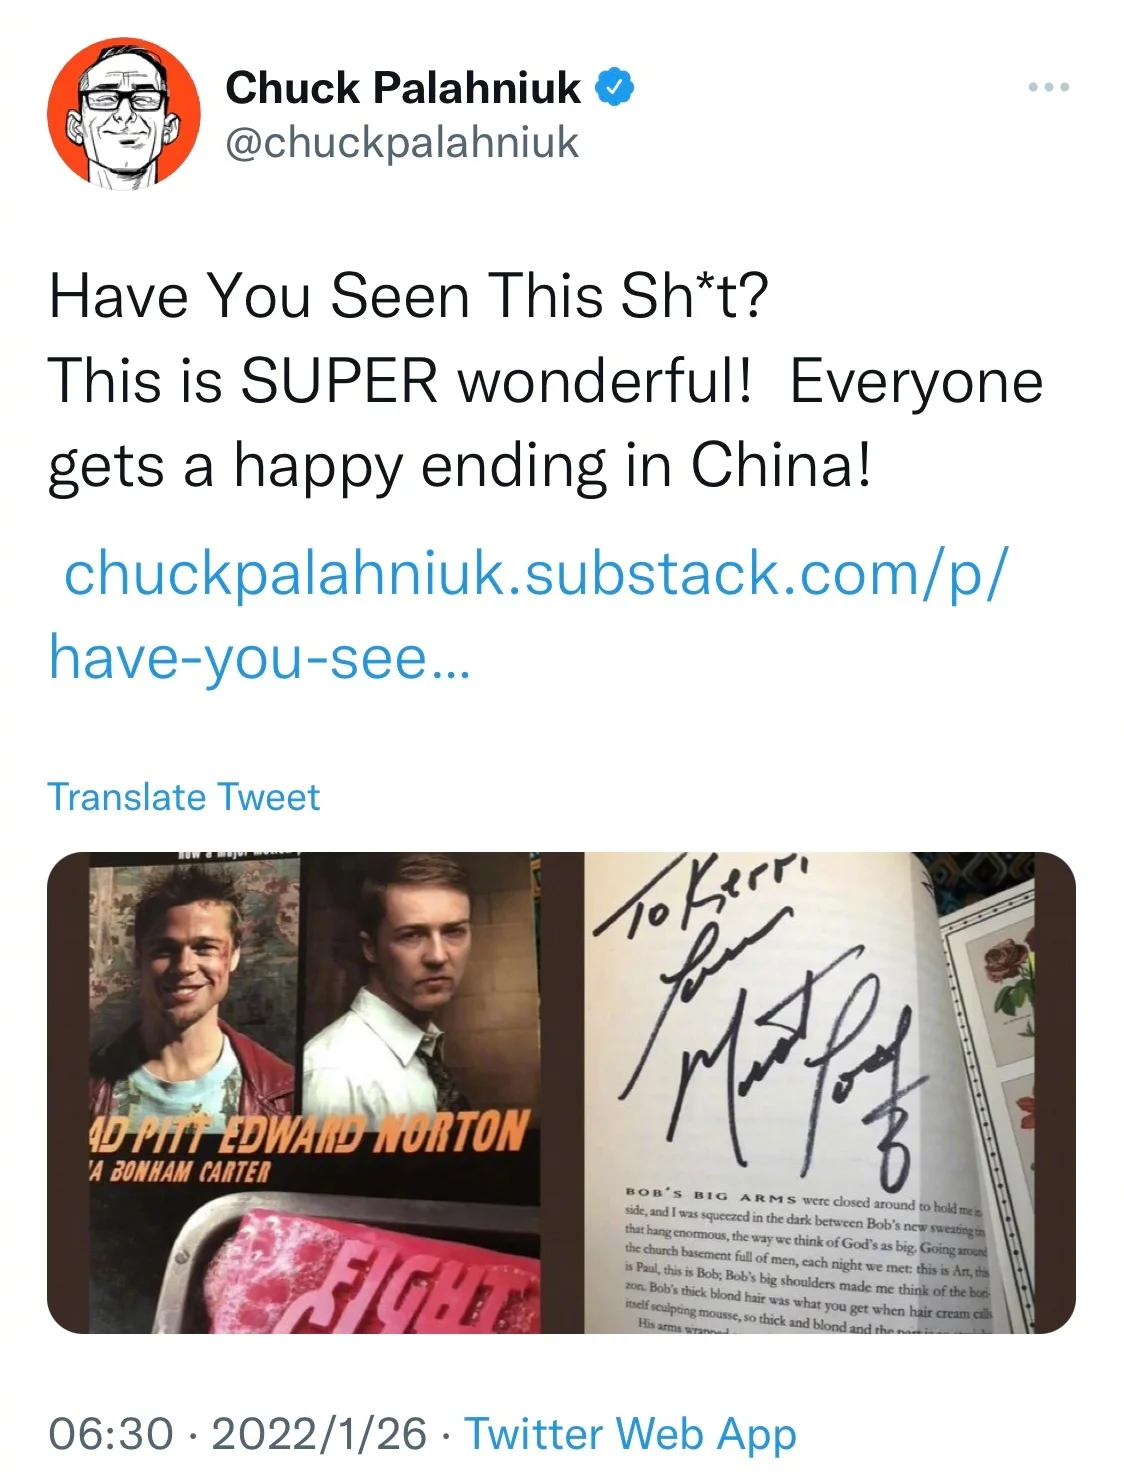 "Fight Club" original author Chuck Palahniuk responds to the Chinese "special edition" ending